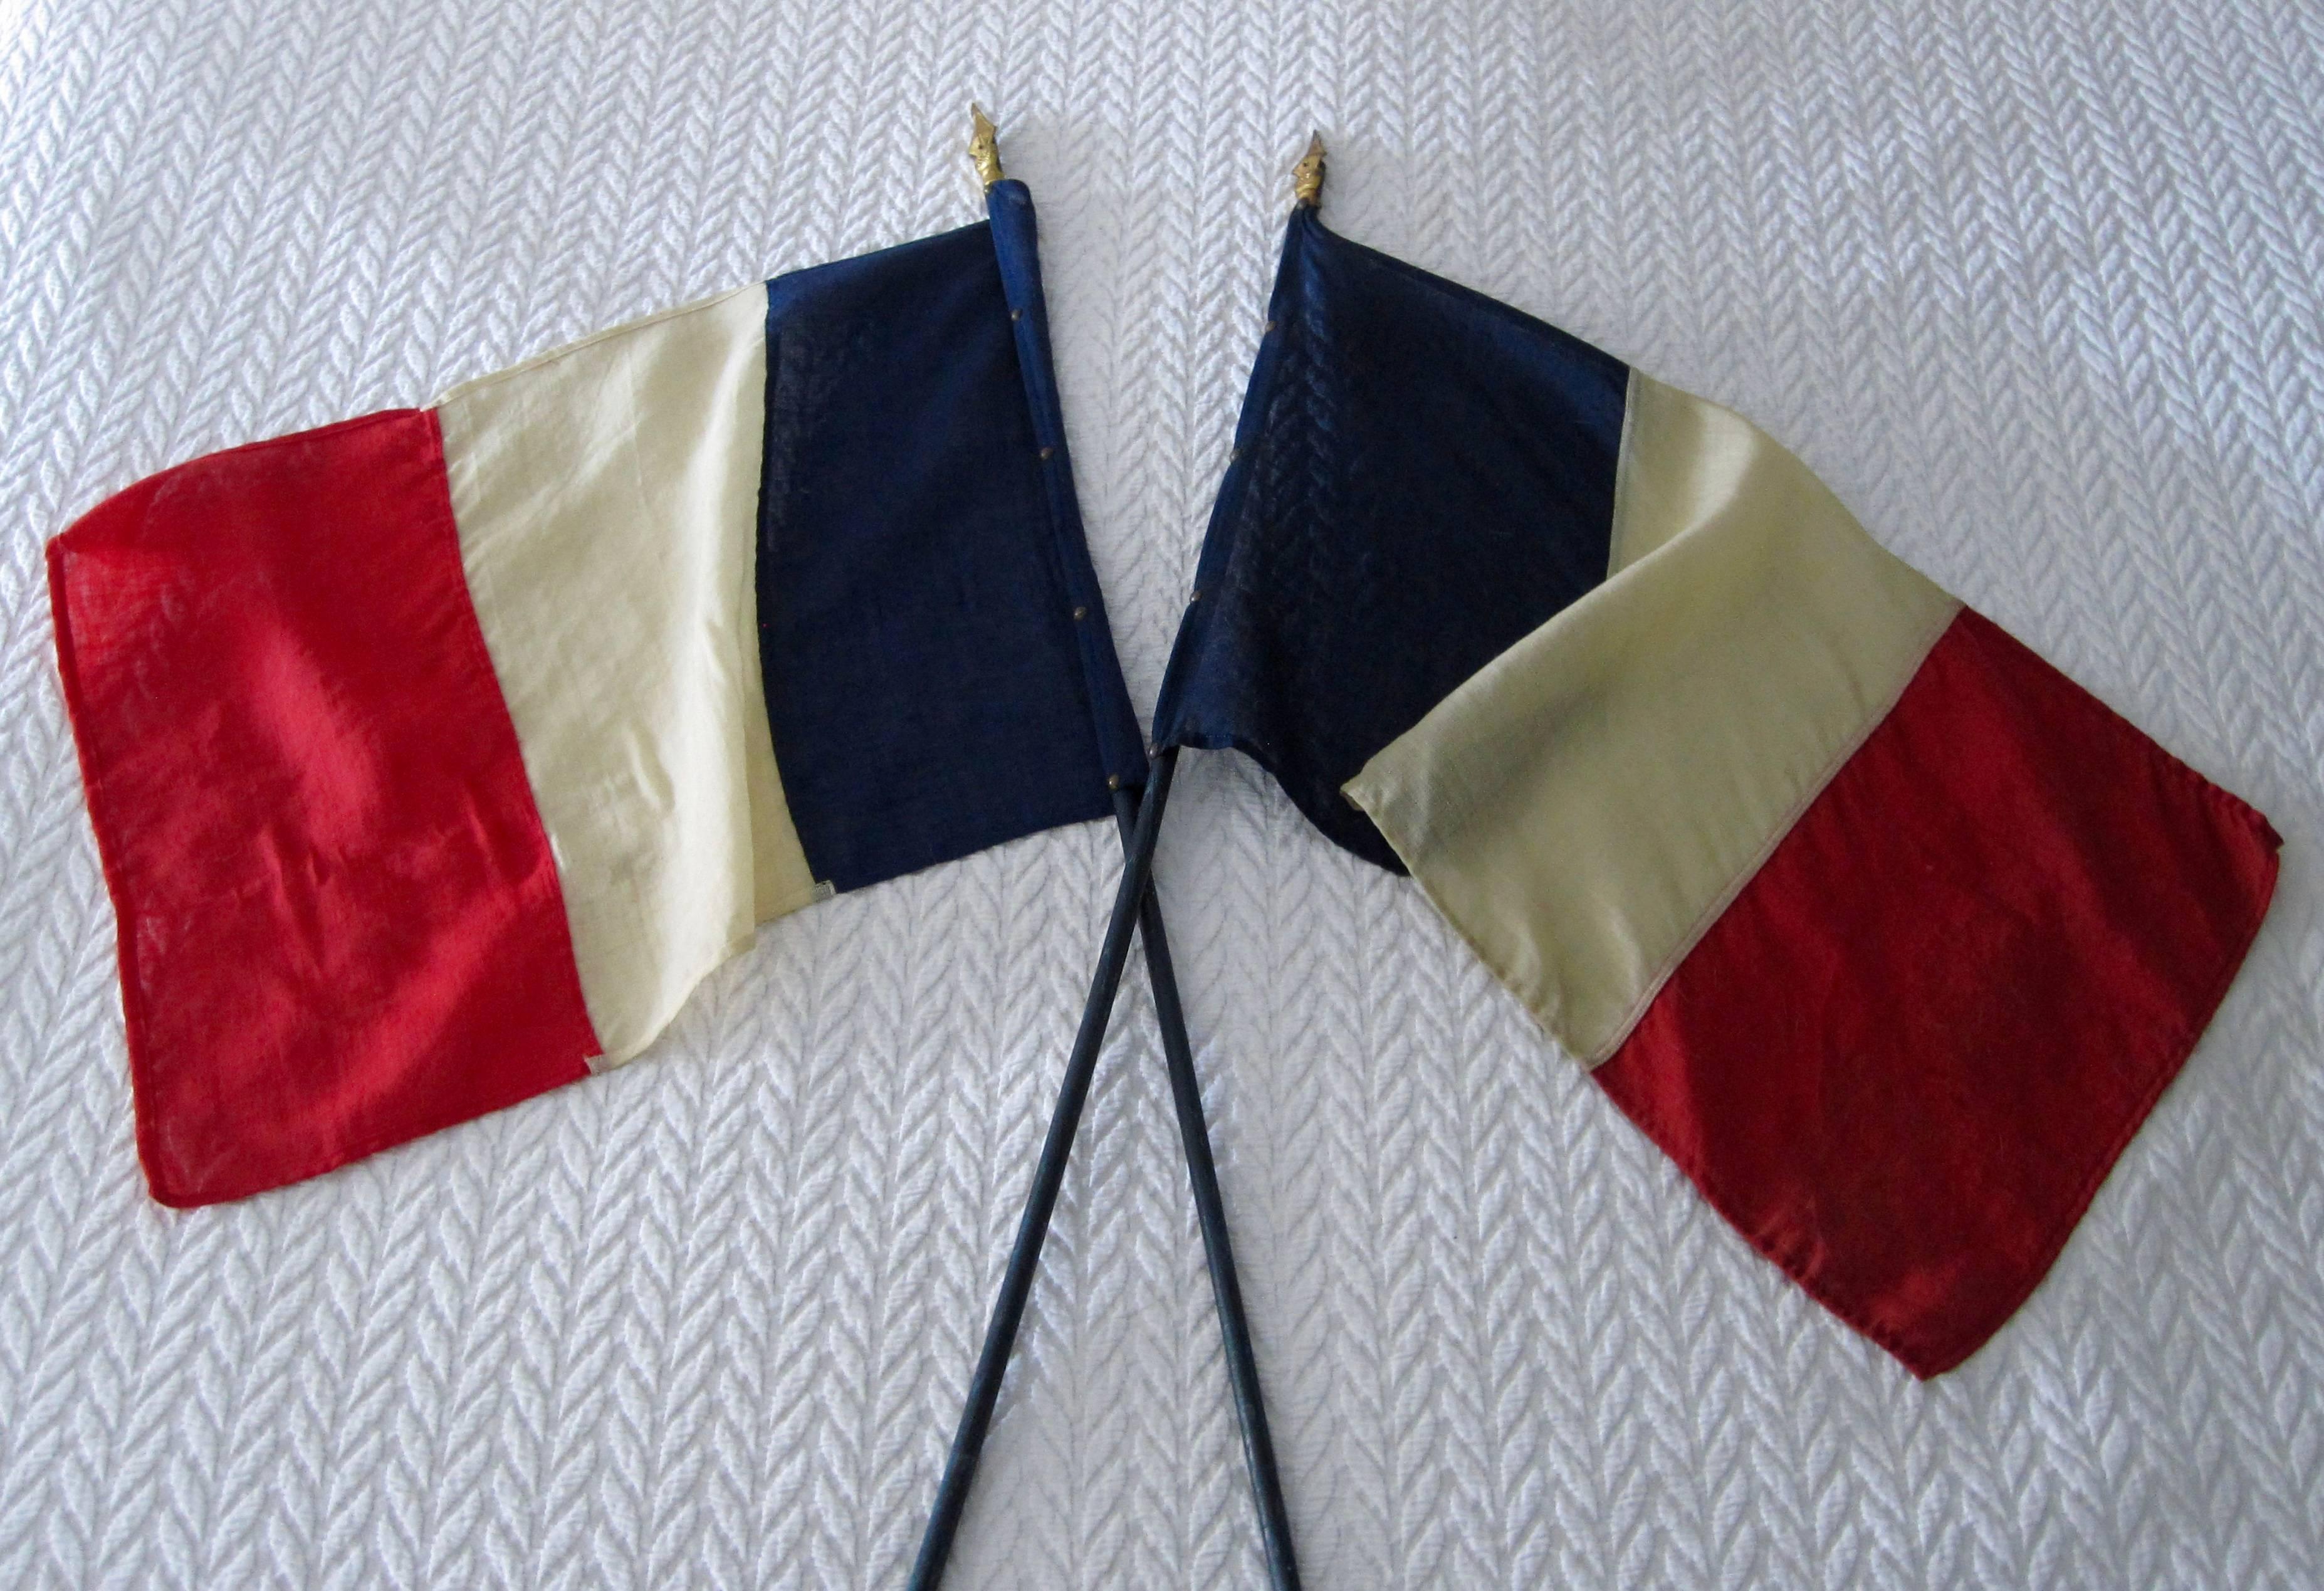 A pair of 1940s French tri-color flags dating to the end of the 2nd World War.
After the liberation of Paris and the end of WWII was declared, French citizens were given these large processional flags to celebrate with the allies and the returning